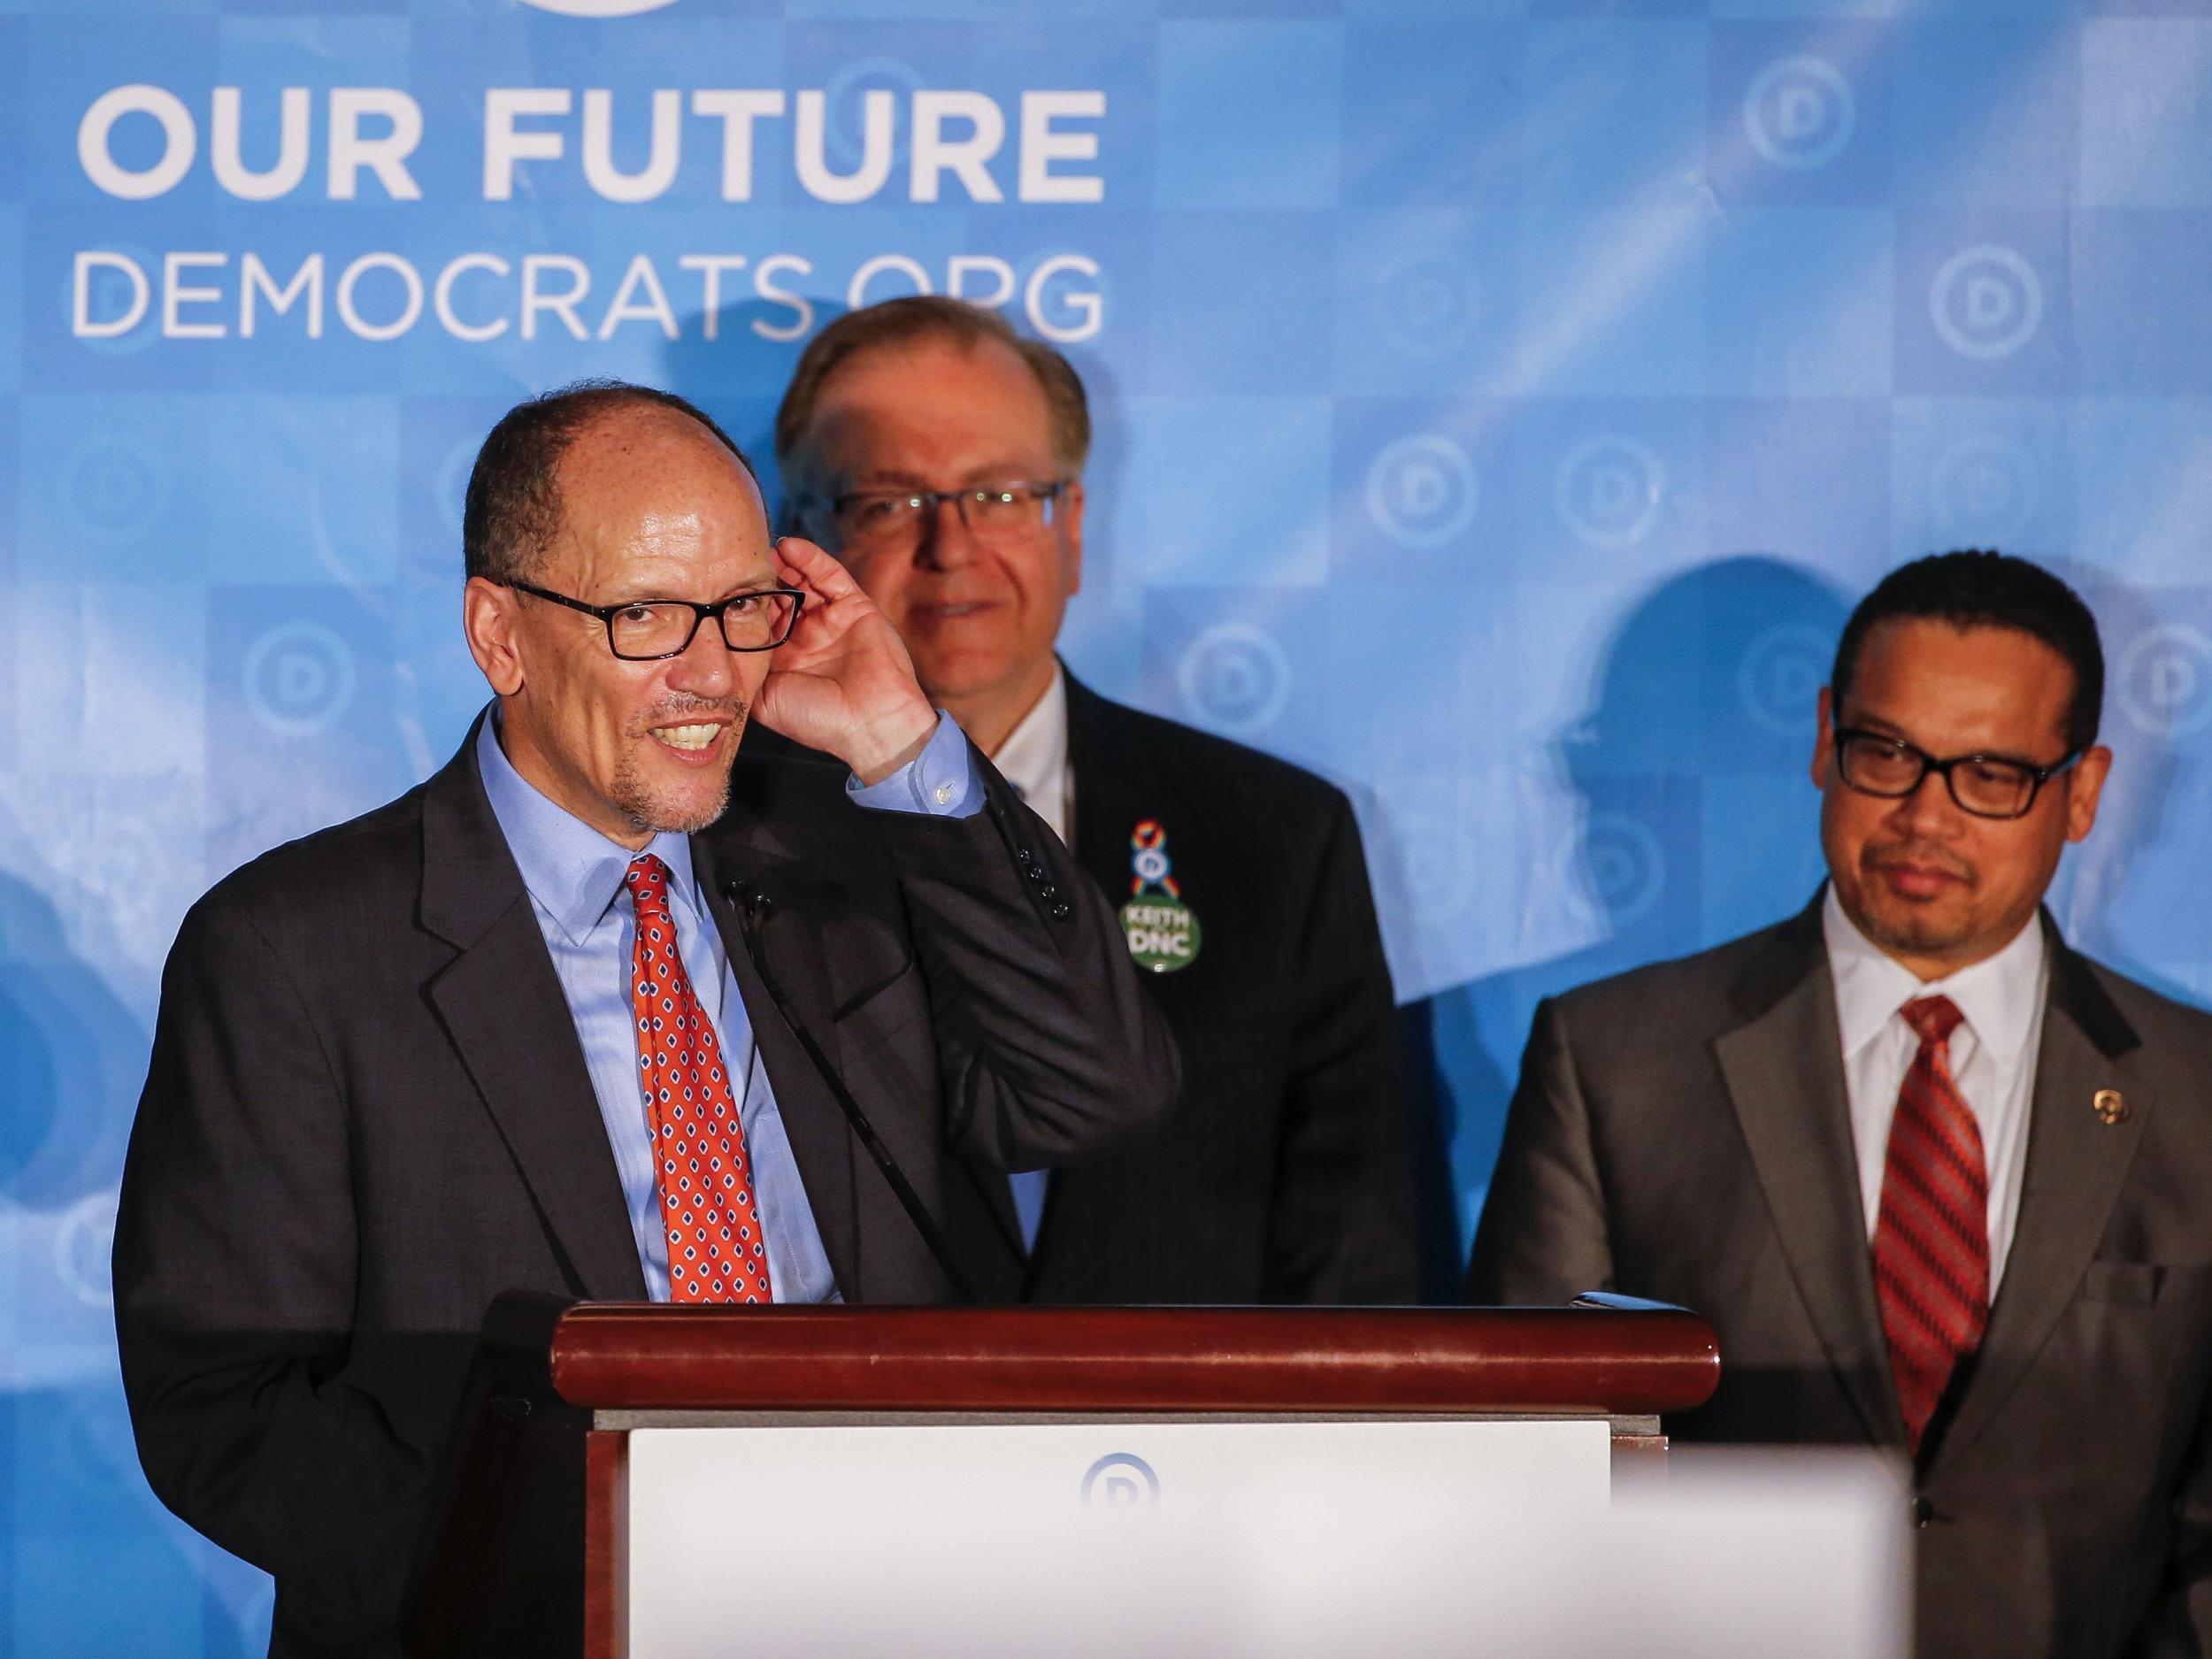 Democratic National Committee elects Tom Perez as new Party Chairman